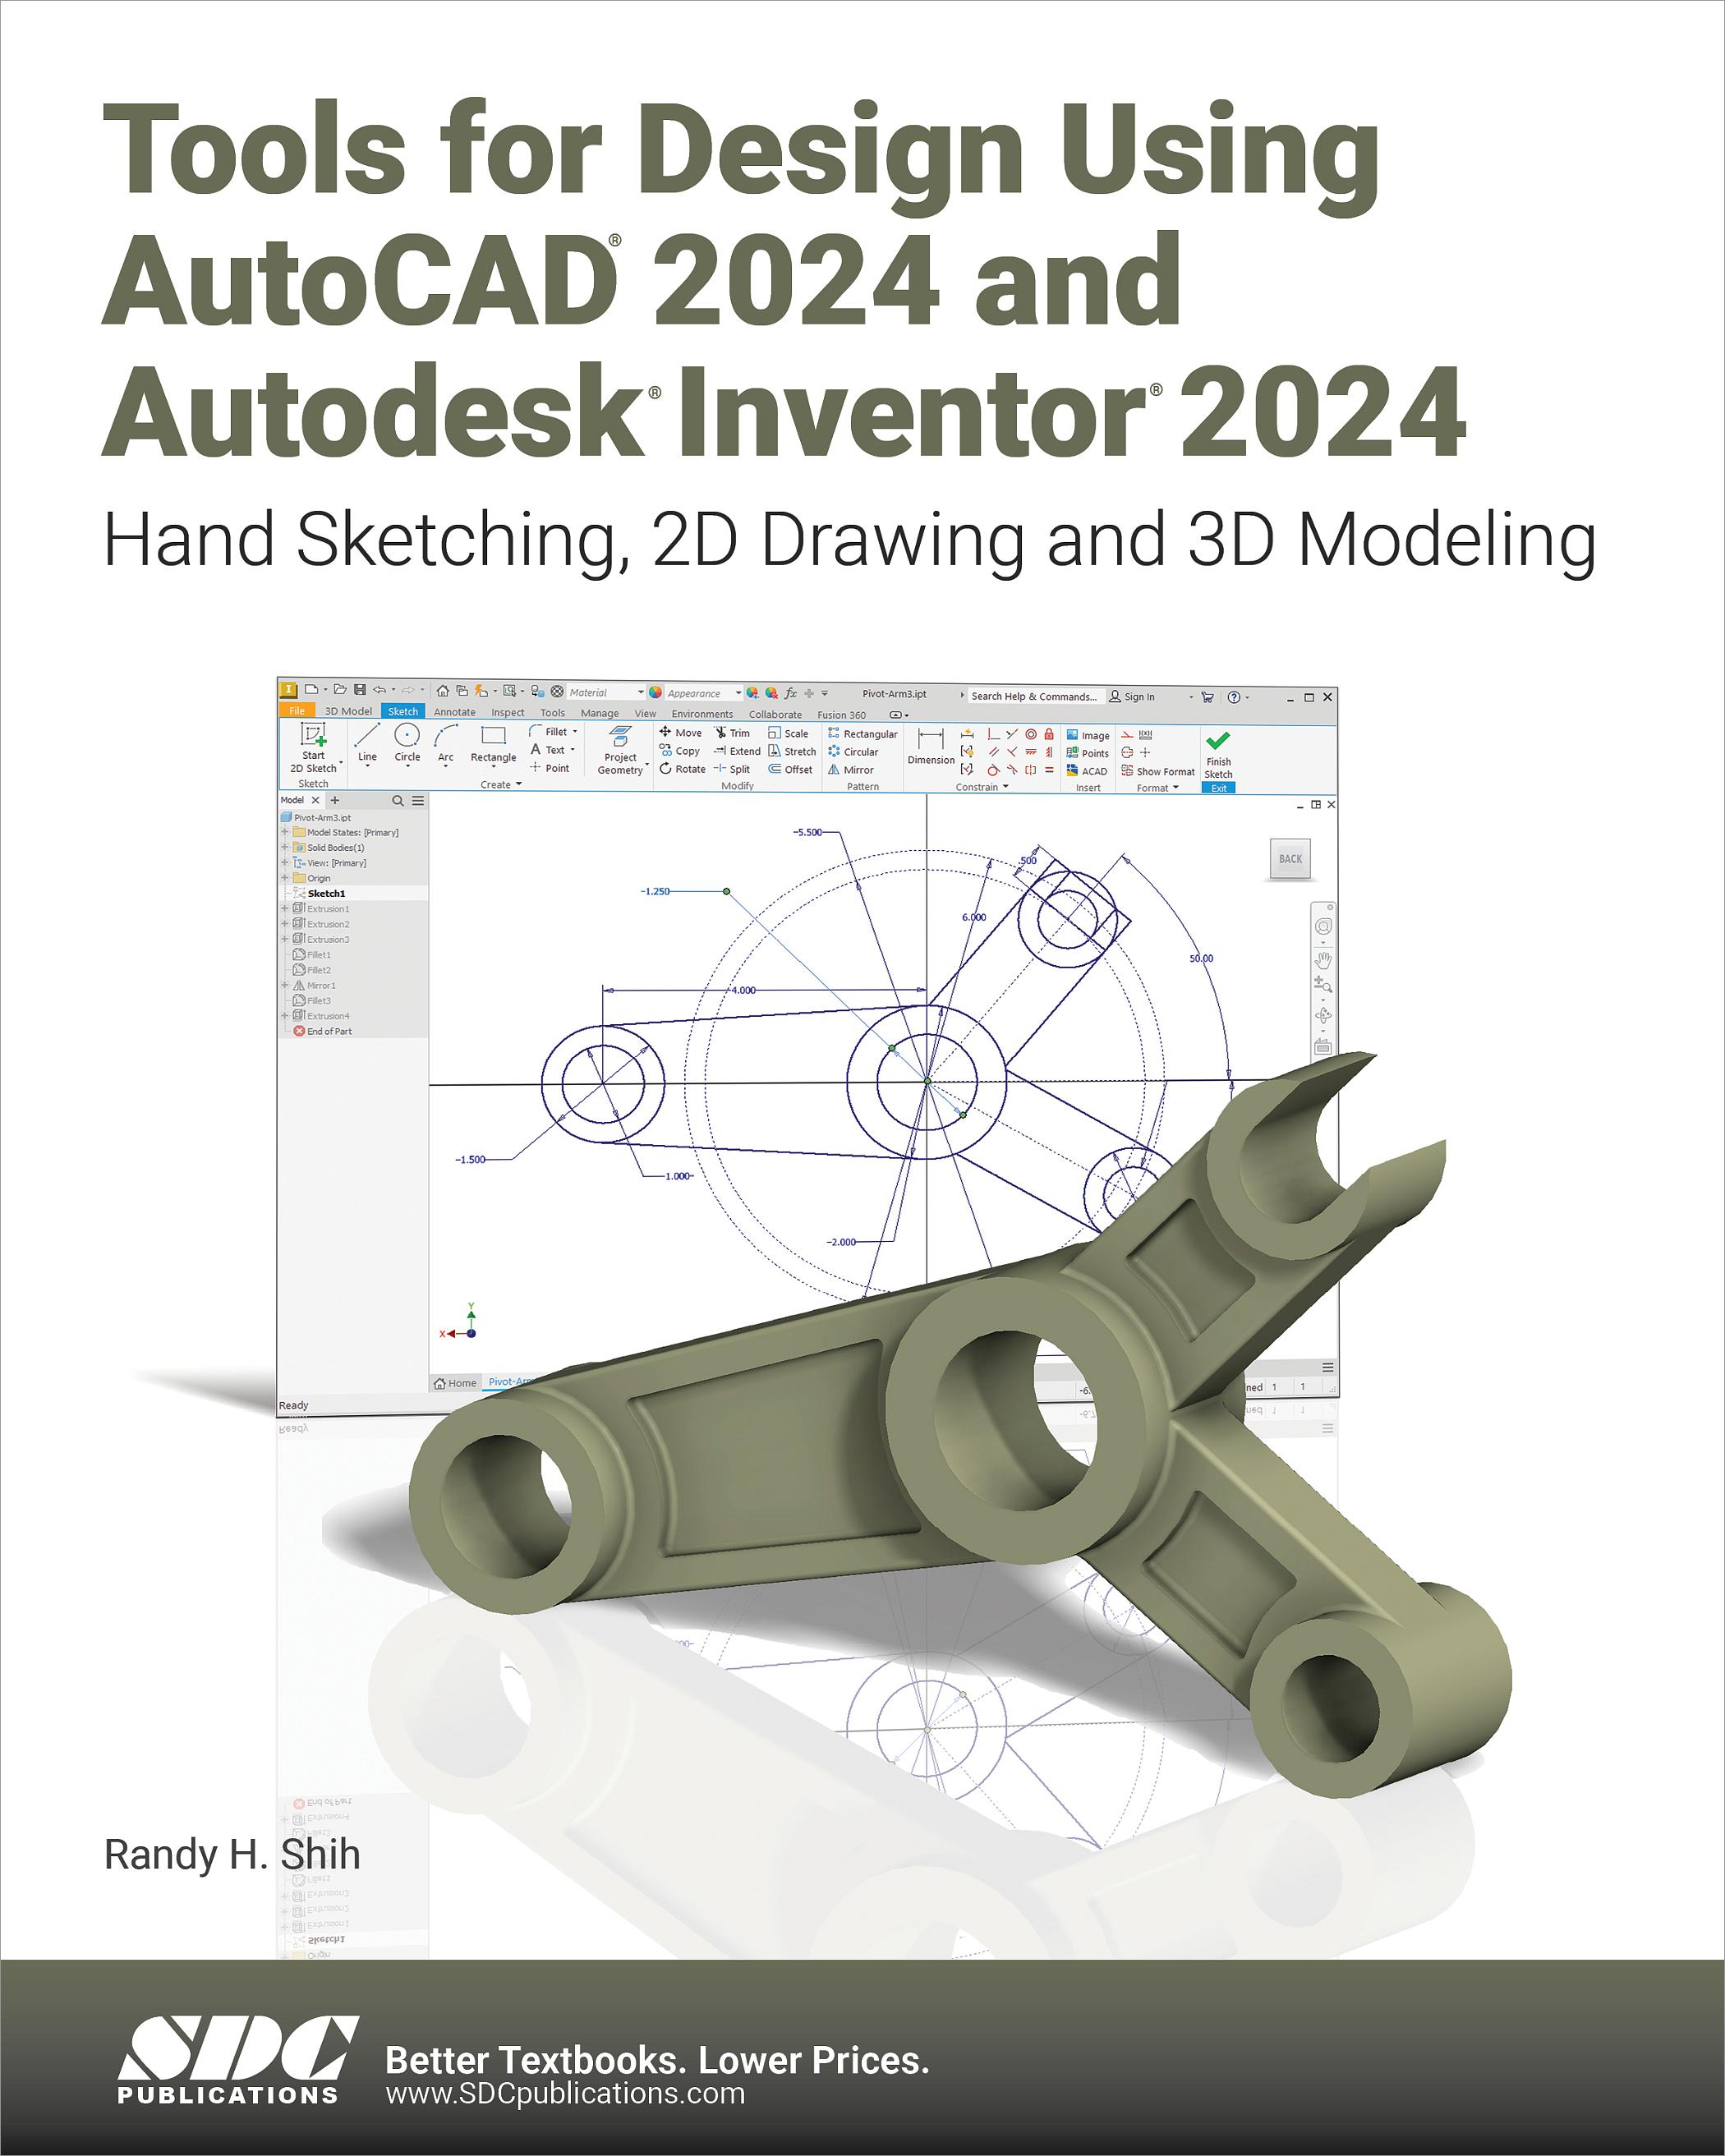 Tools for Design Using AutoCAD 2024 and Autodesk Inventor 2024, Book 9781630575915 SDC